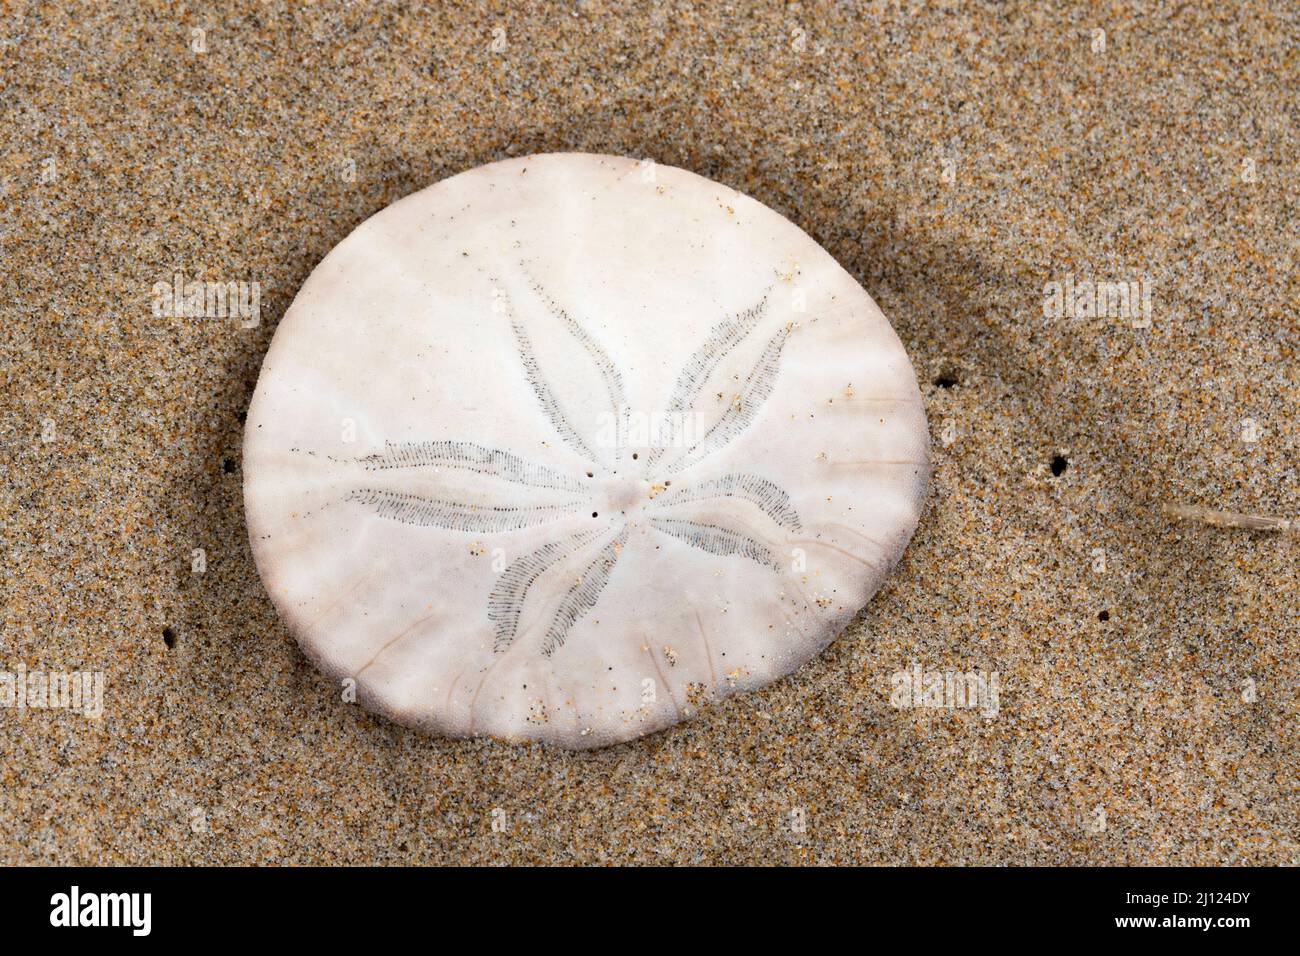 The Eccentric Sand Dollar is - Olympic National Park